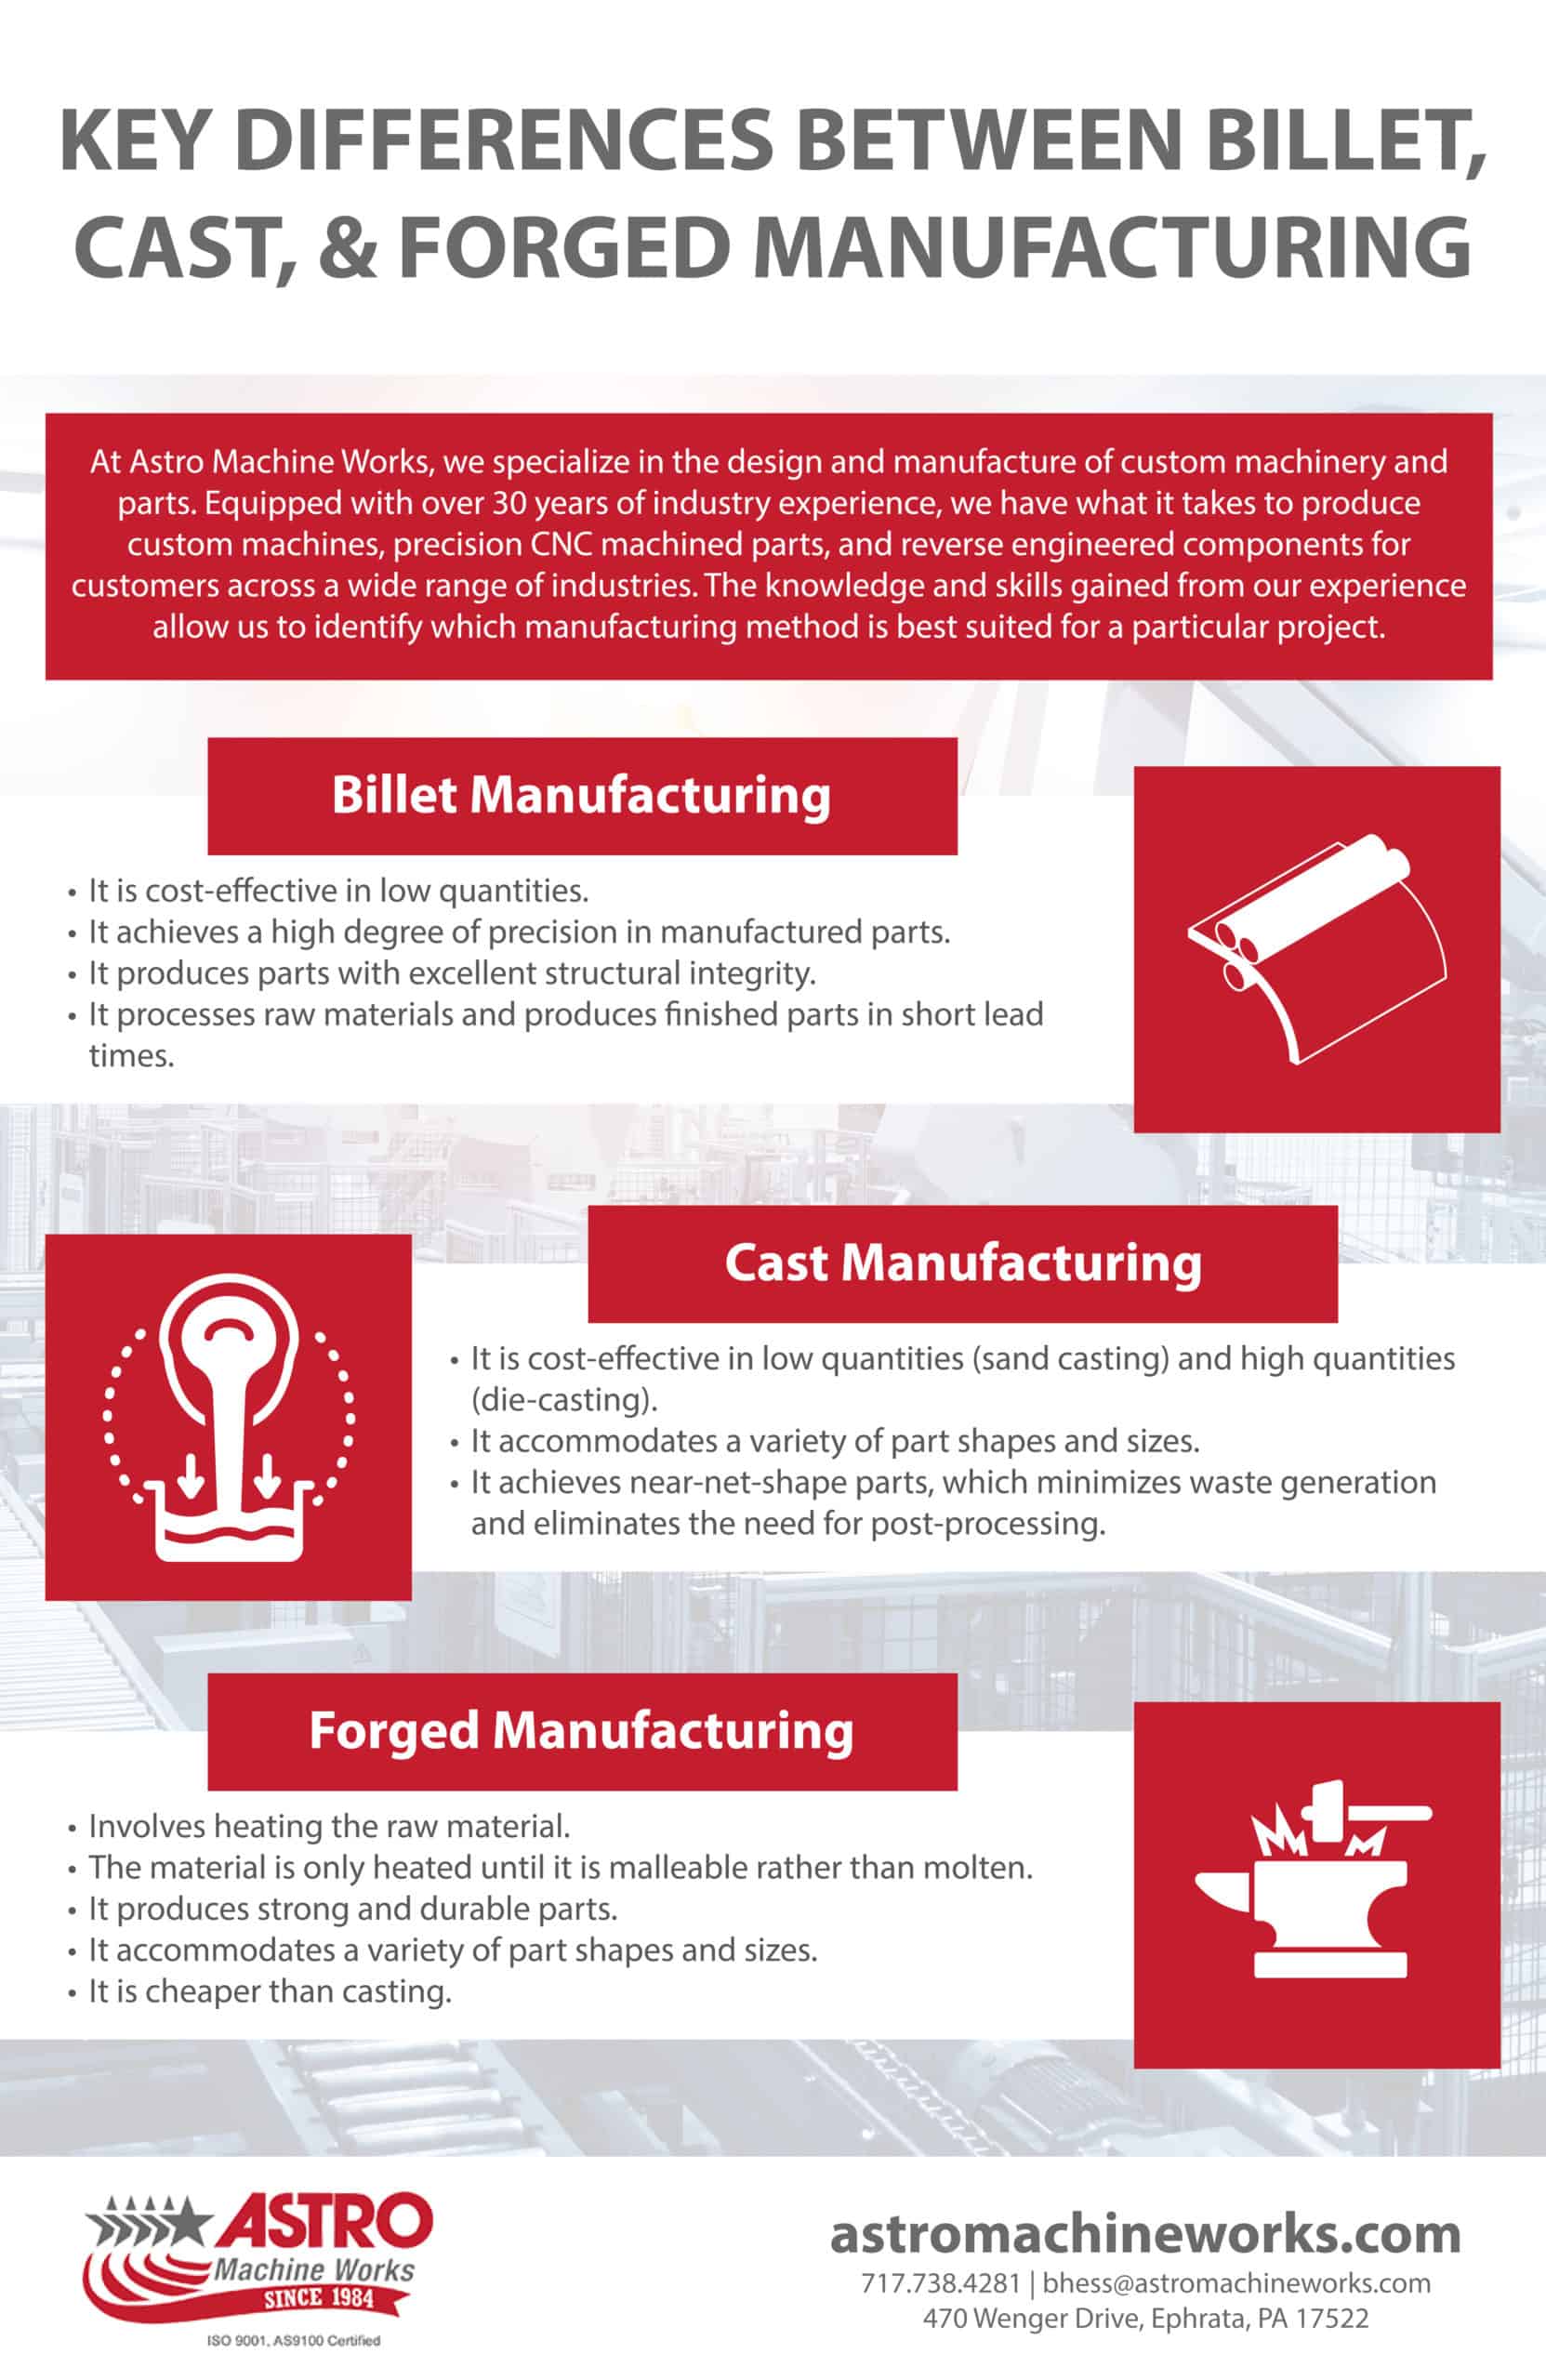 Key Differences Between Billet, Cast, & Forged Manufacturing